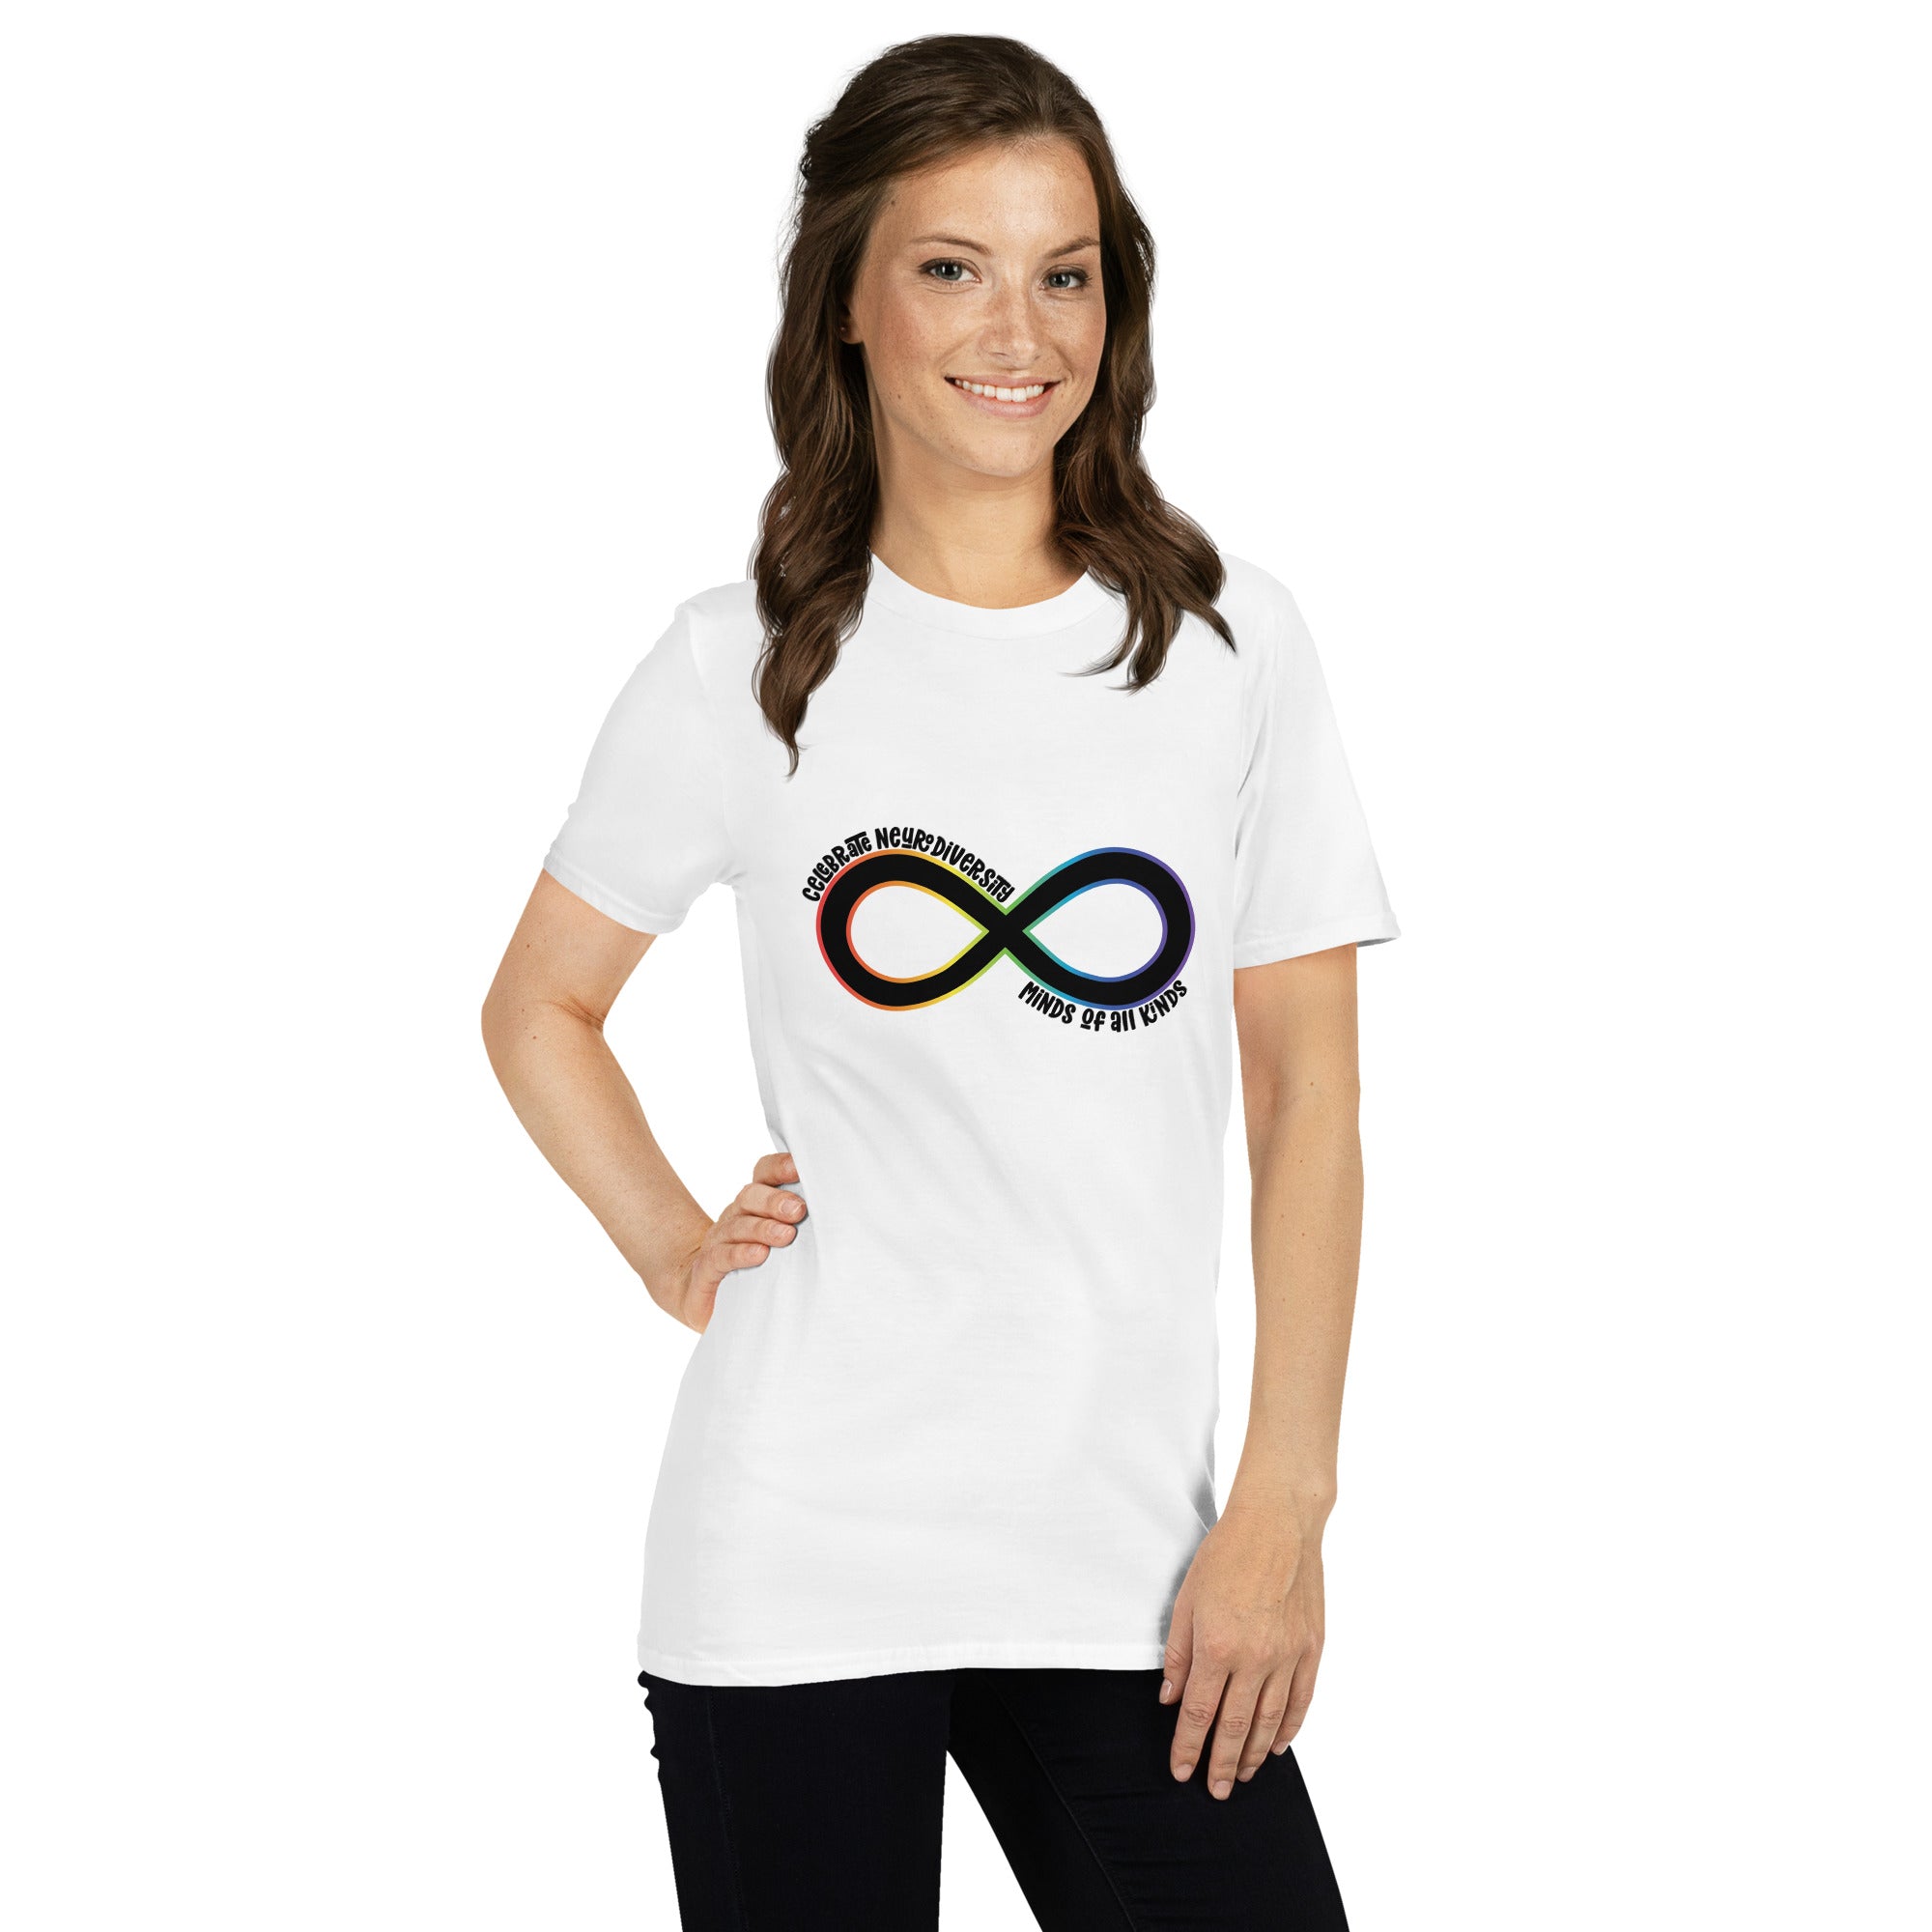 Short-Sleeve Unisex T-Shirt- ADHD- Minds Of All Kinds